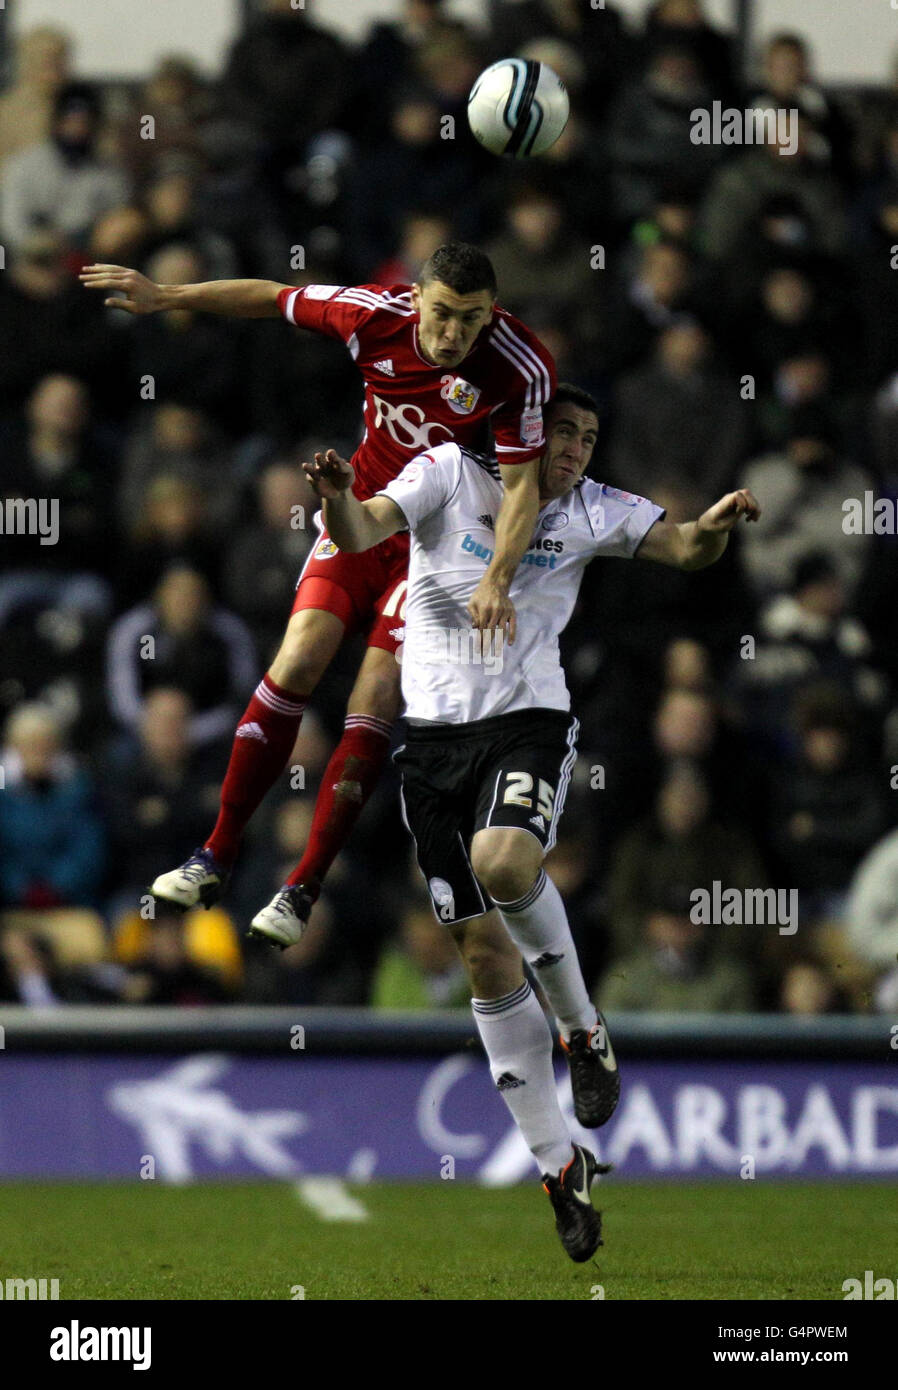 Derby County's Callum Ball battles for possession of the ball in the air with Bristol City's James Wilson during the npower Football League Championship match at Pride Park, Derby. Stock Photo